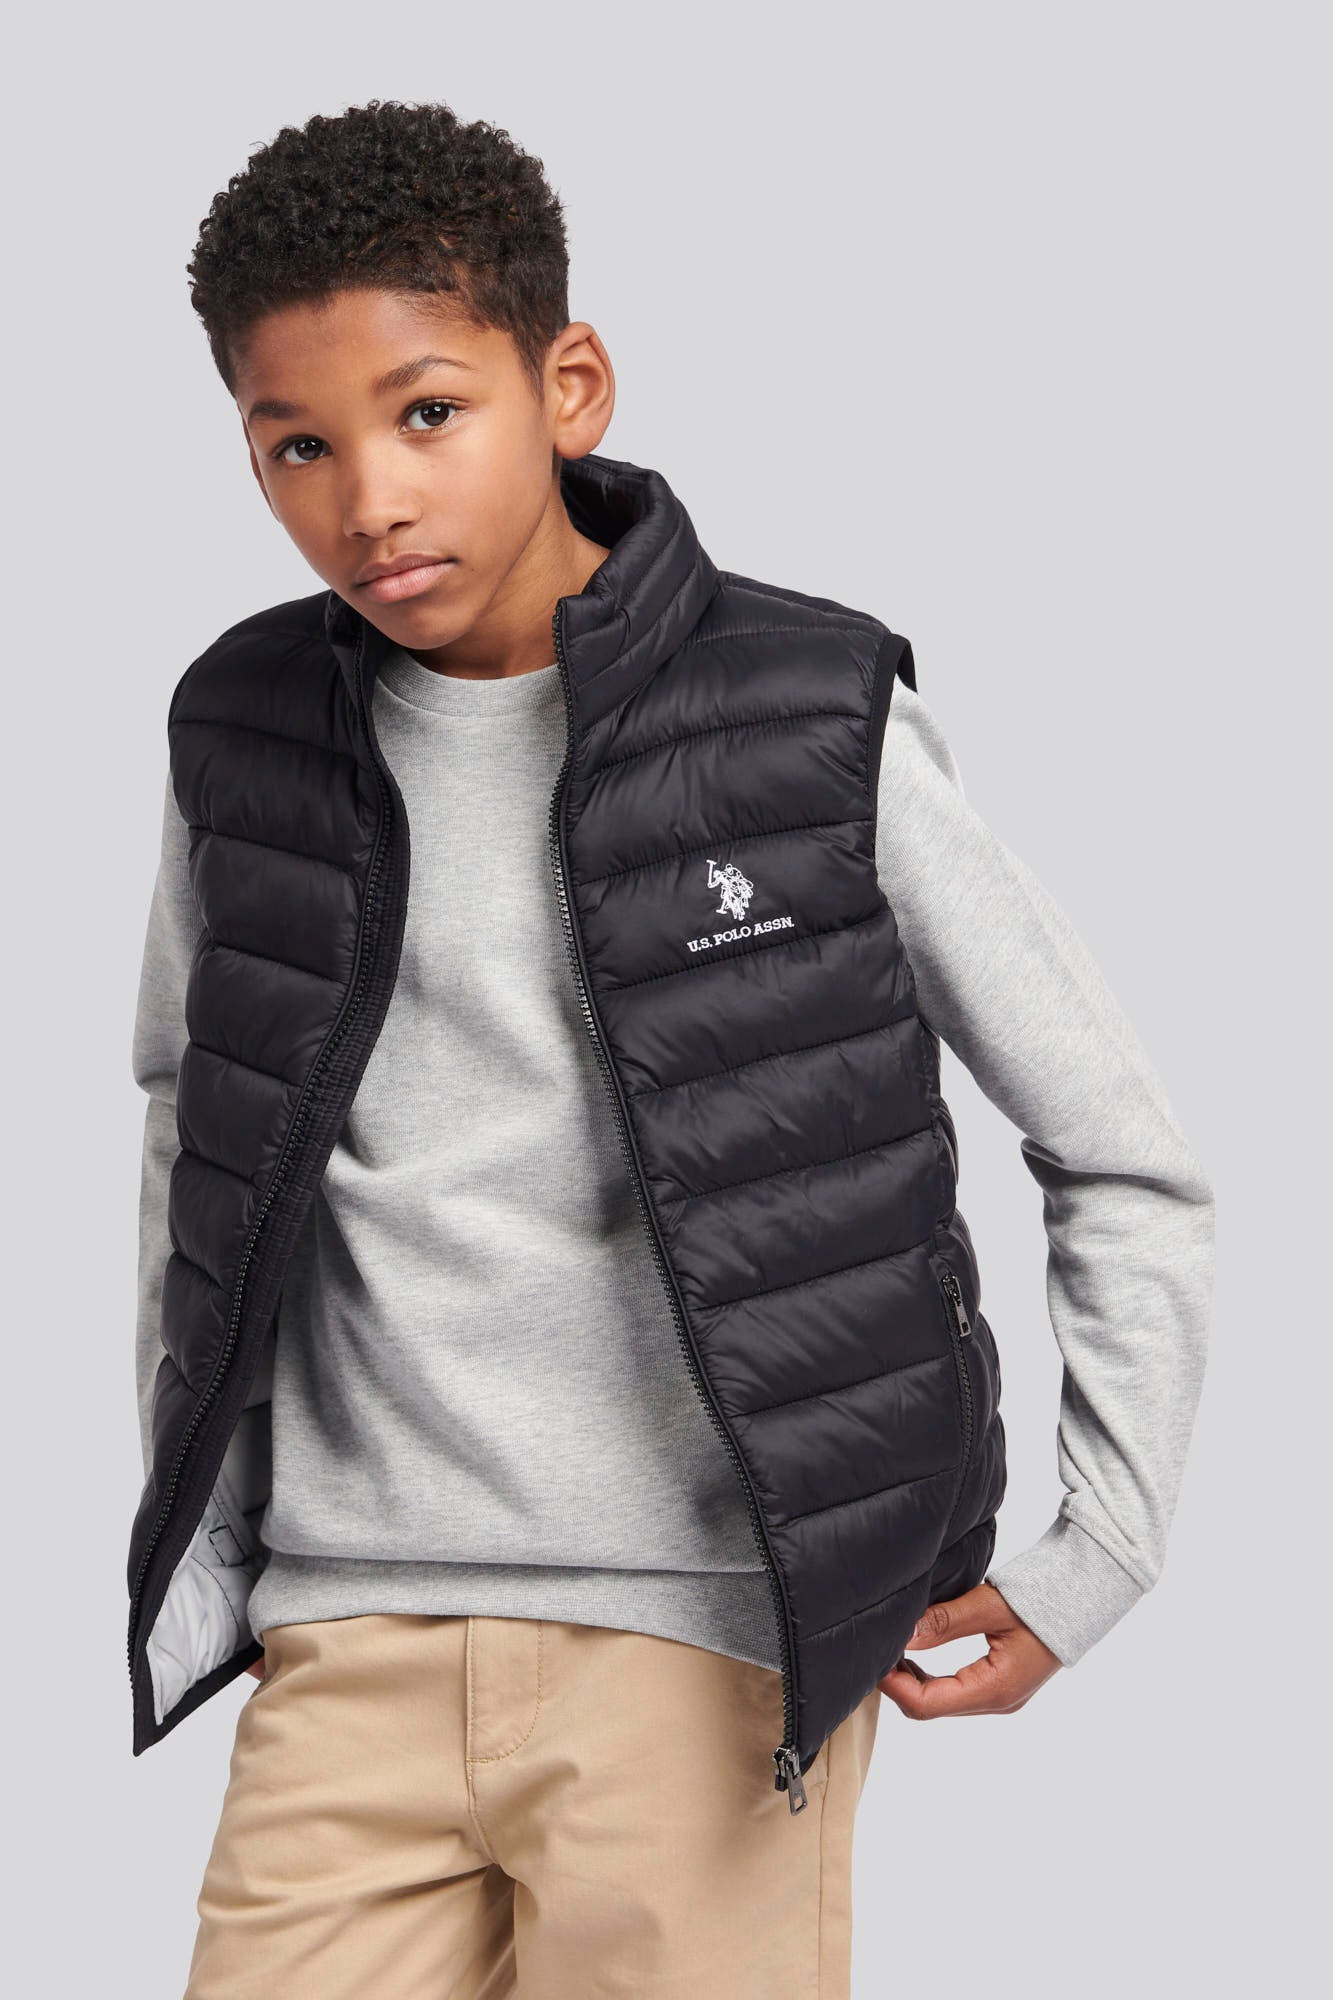 U.S. Polo Assn. Boys Bound Quilted Gilet in Black Bright White DHM